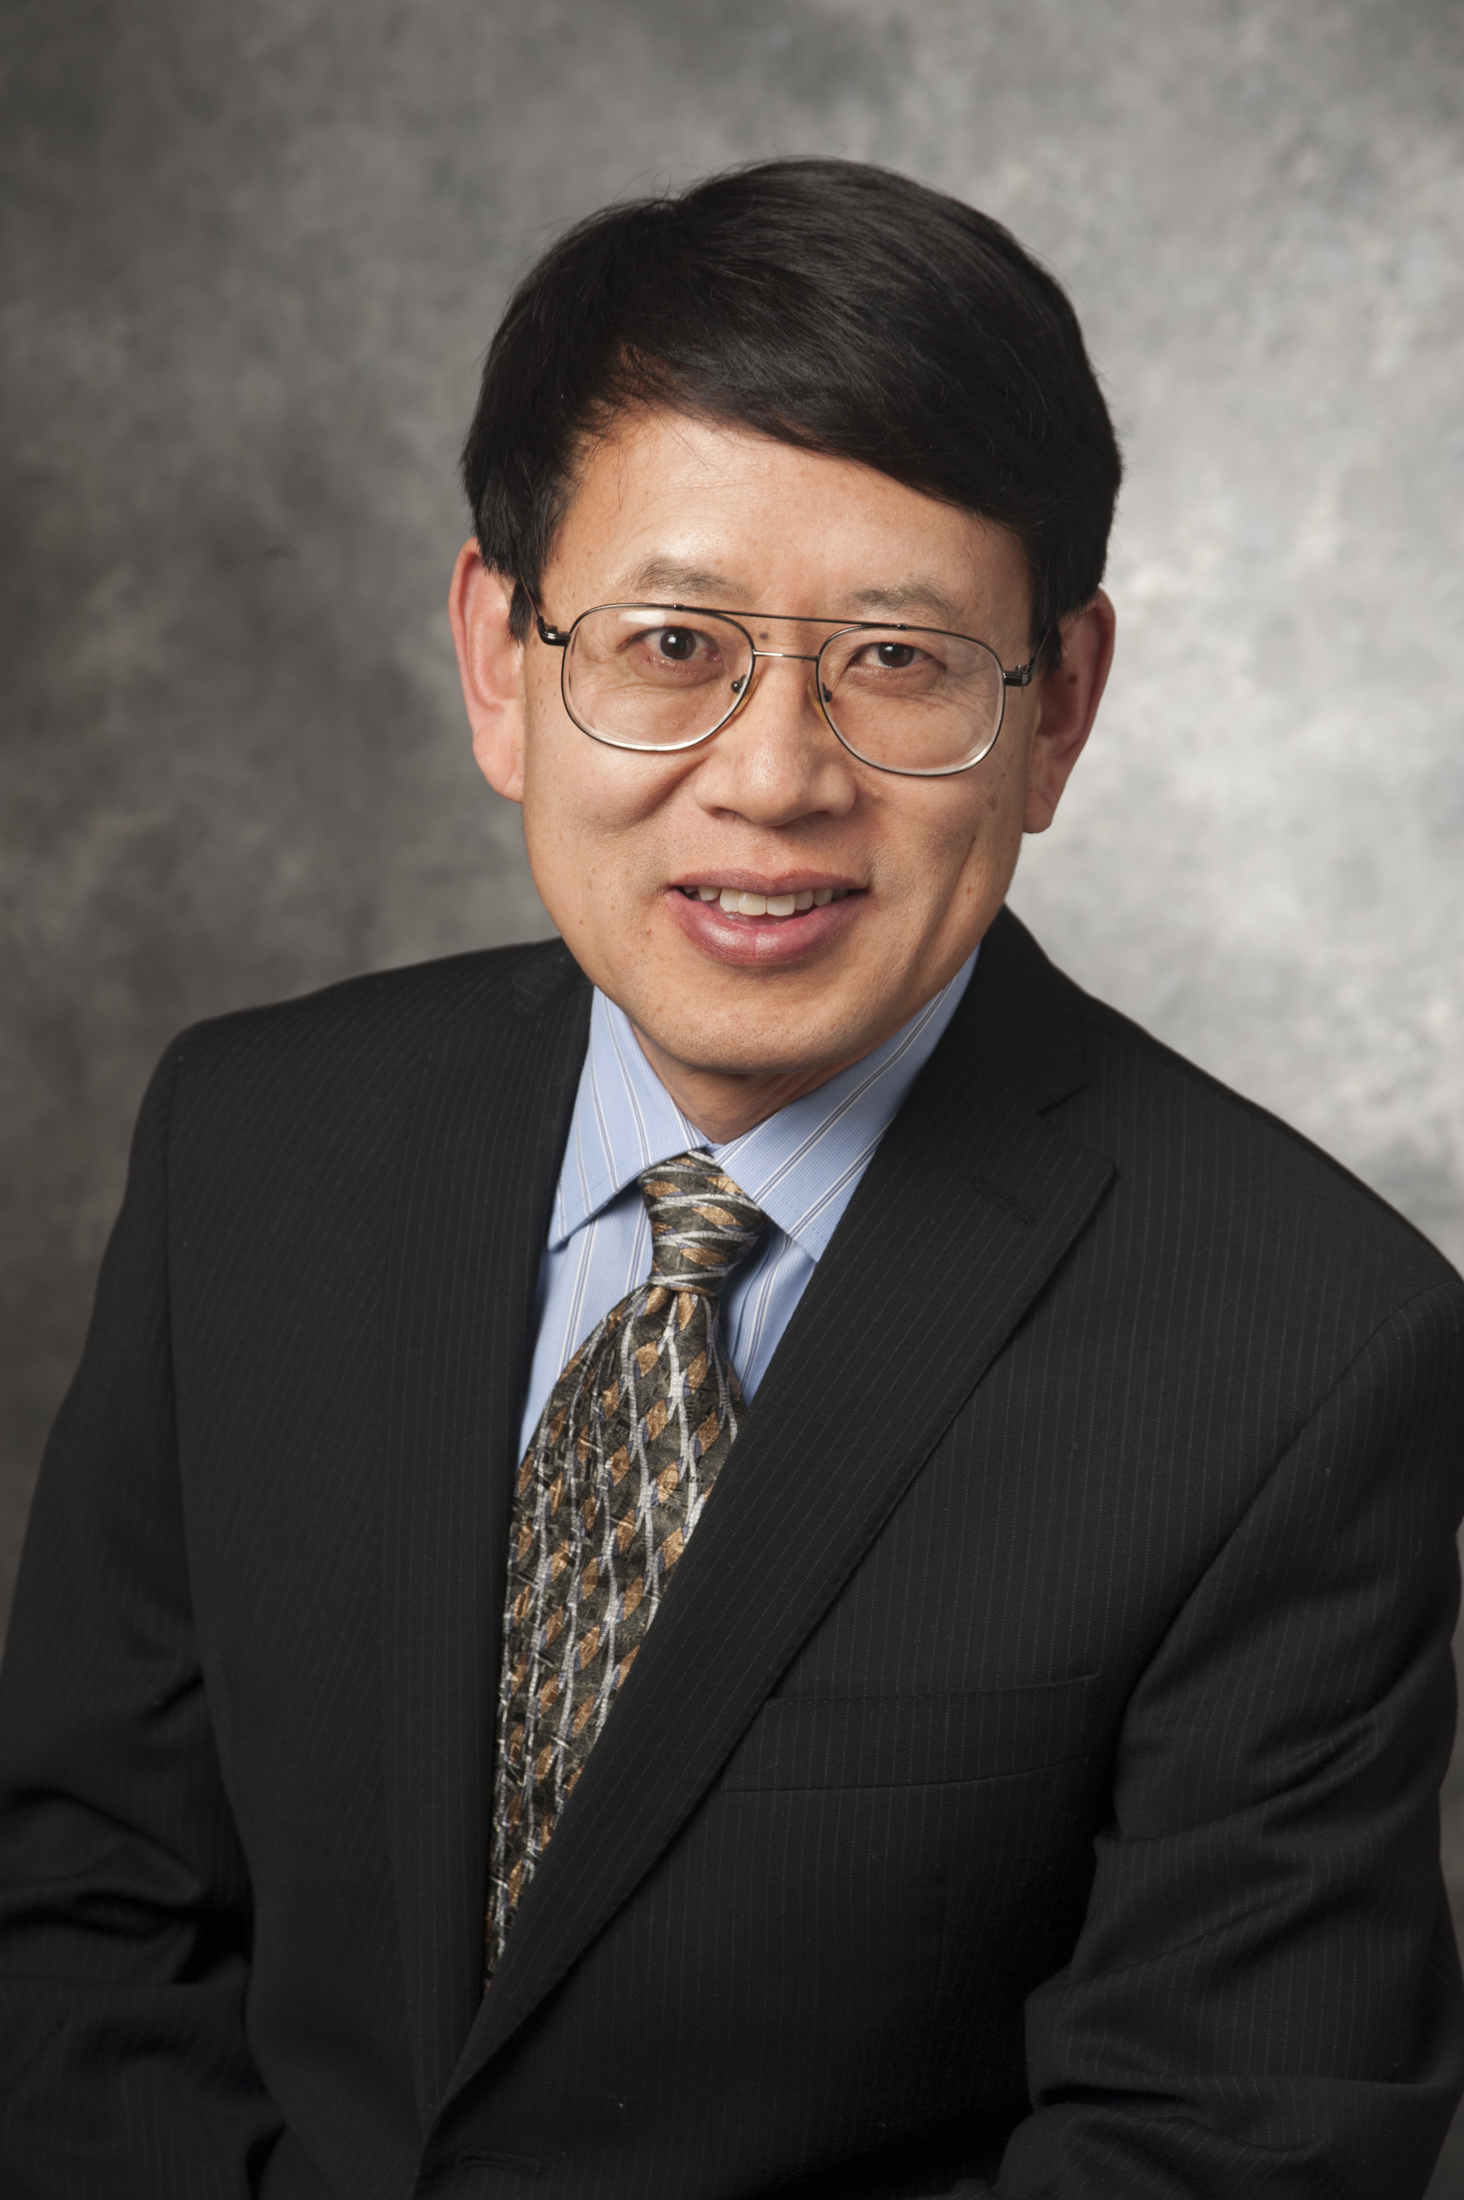 A headshot of Jeff Tian, a member of the Lyle School of Engineering Faculty.